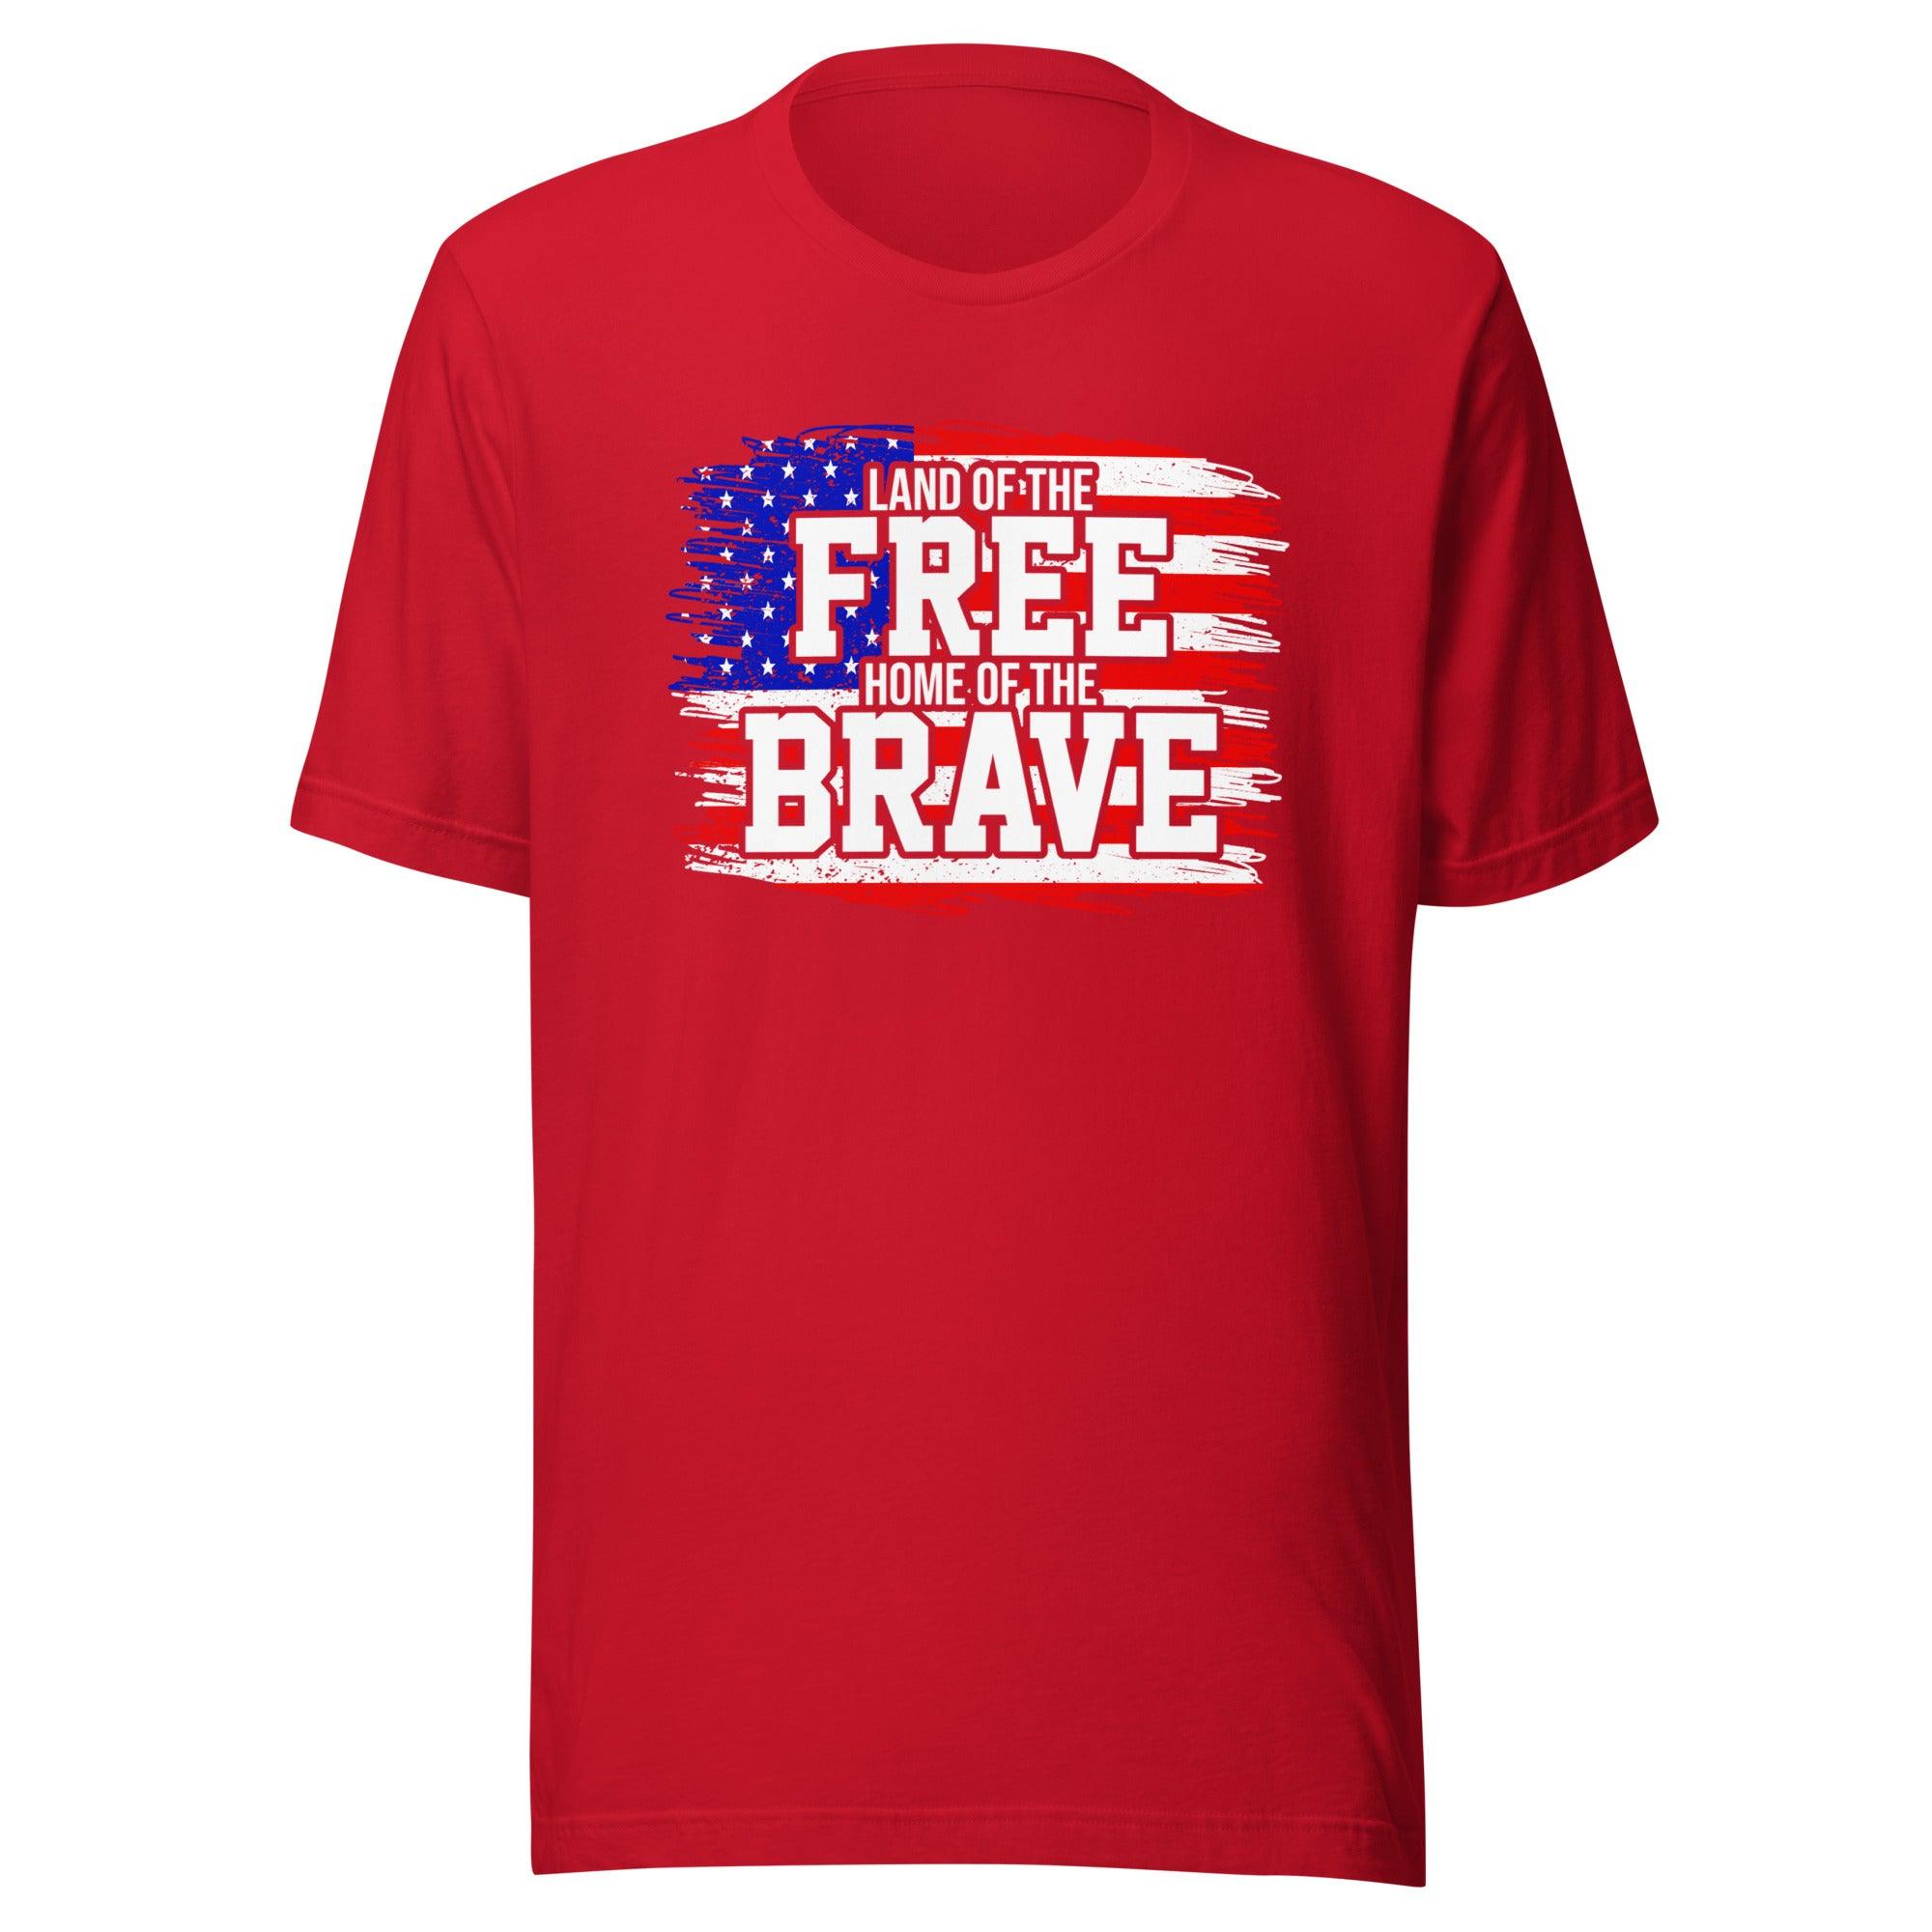 Flag T-shirt Land of the Free Home of The Brave Unisex Top - TopKoalaTee